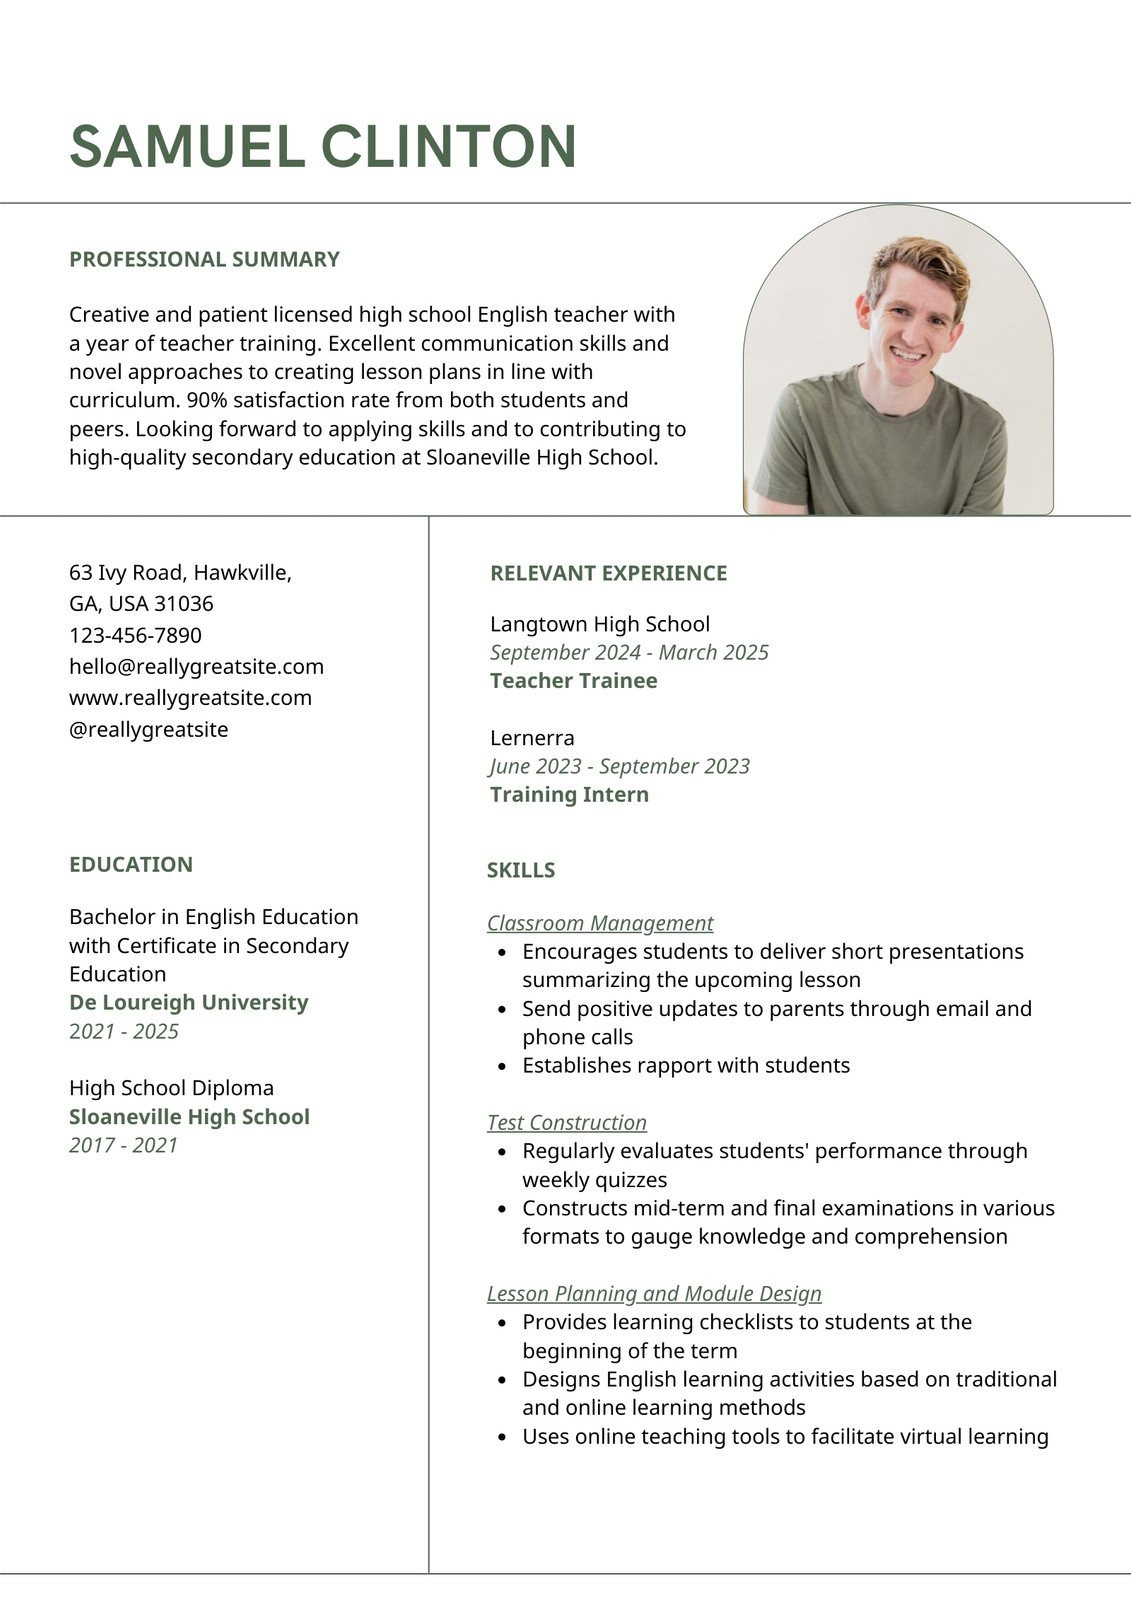 Resume Samples for Experienced Kpo Professionals Free, Printable, Customizable Photo Resume Templates Canva